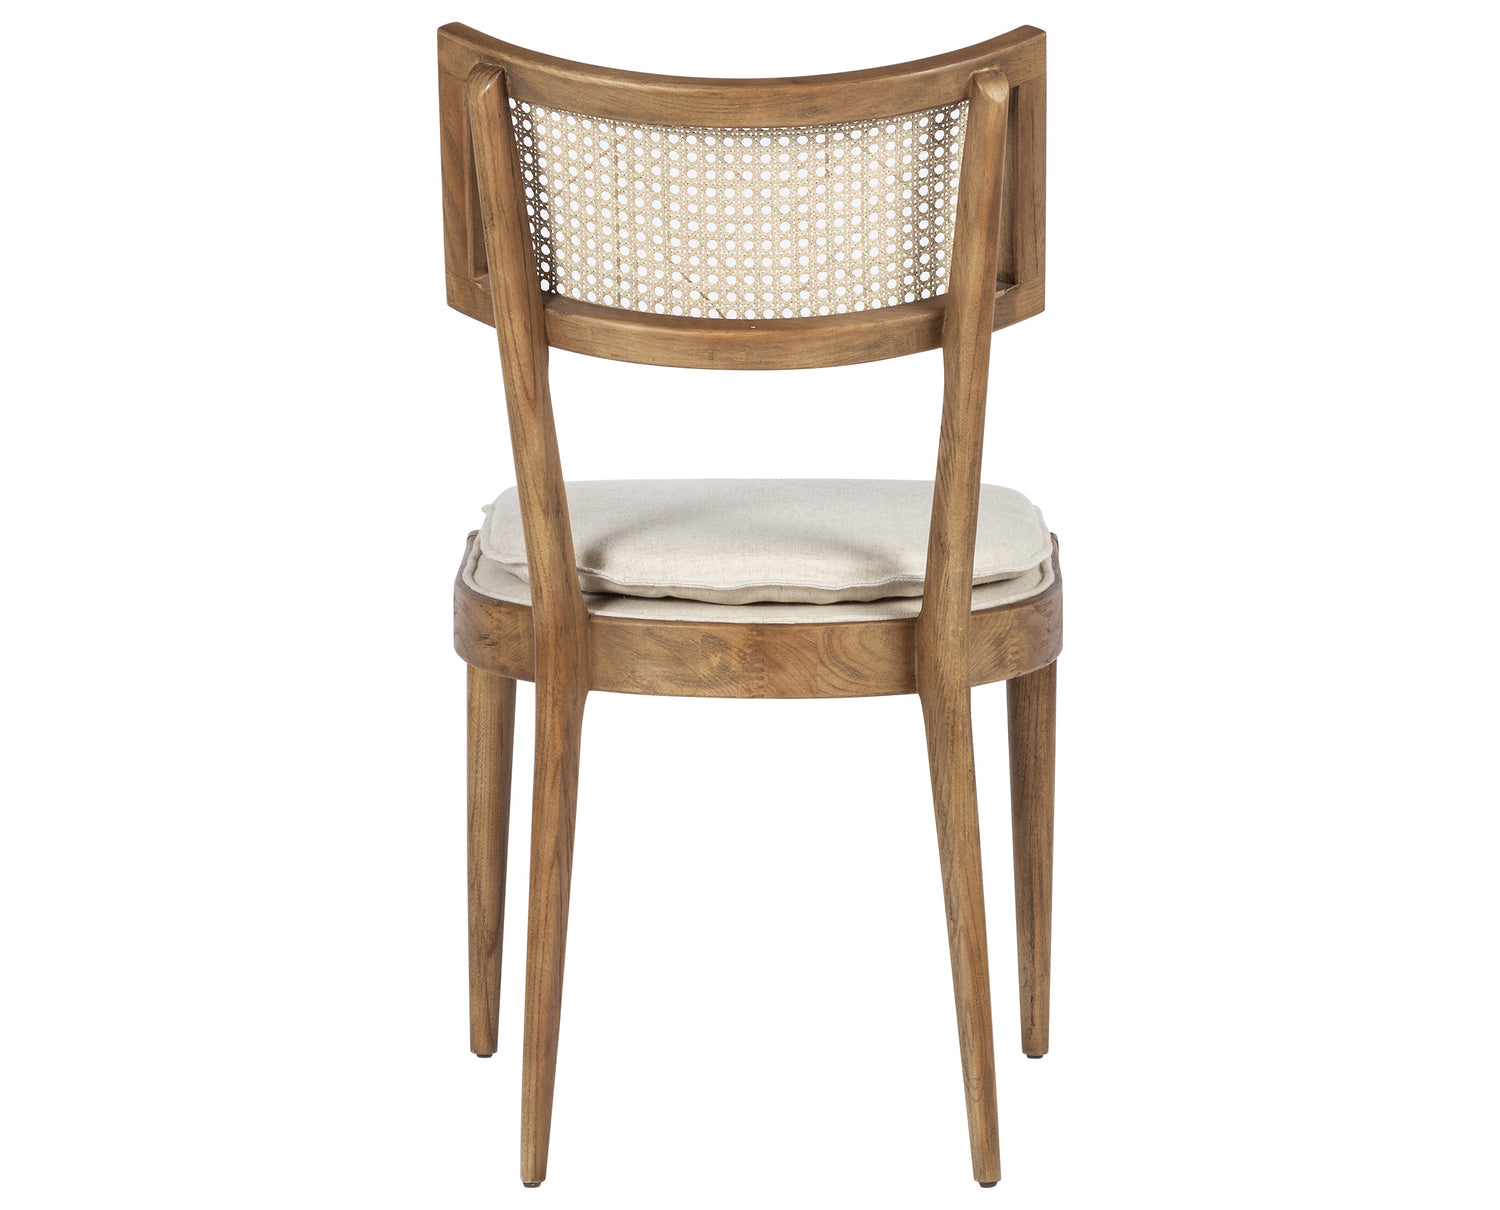 Savile Flax Fabric and Toasted Nettlewood with Natural Cane | Britt Dining Chair | Valley Ridge Furniture